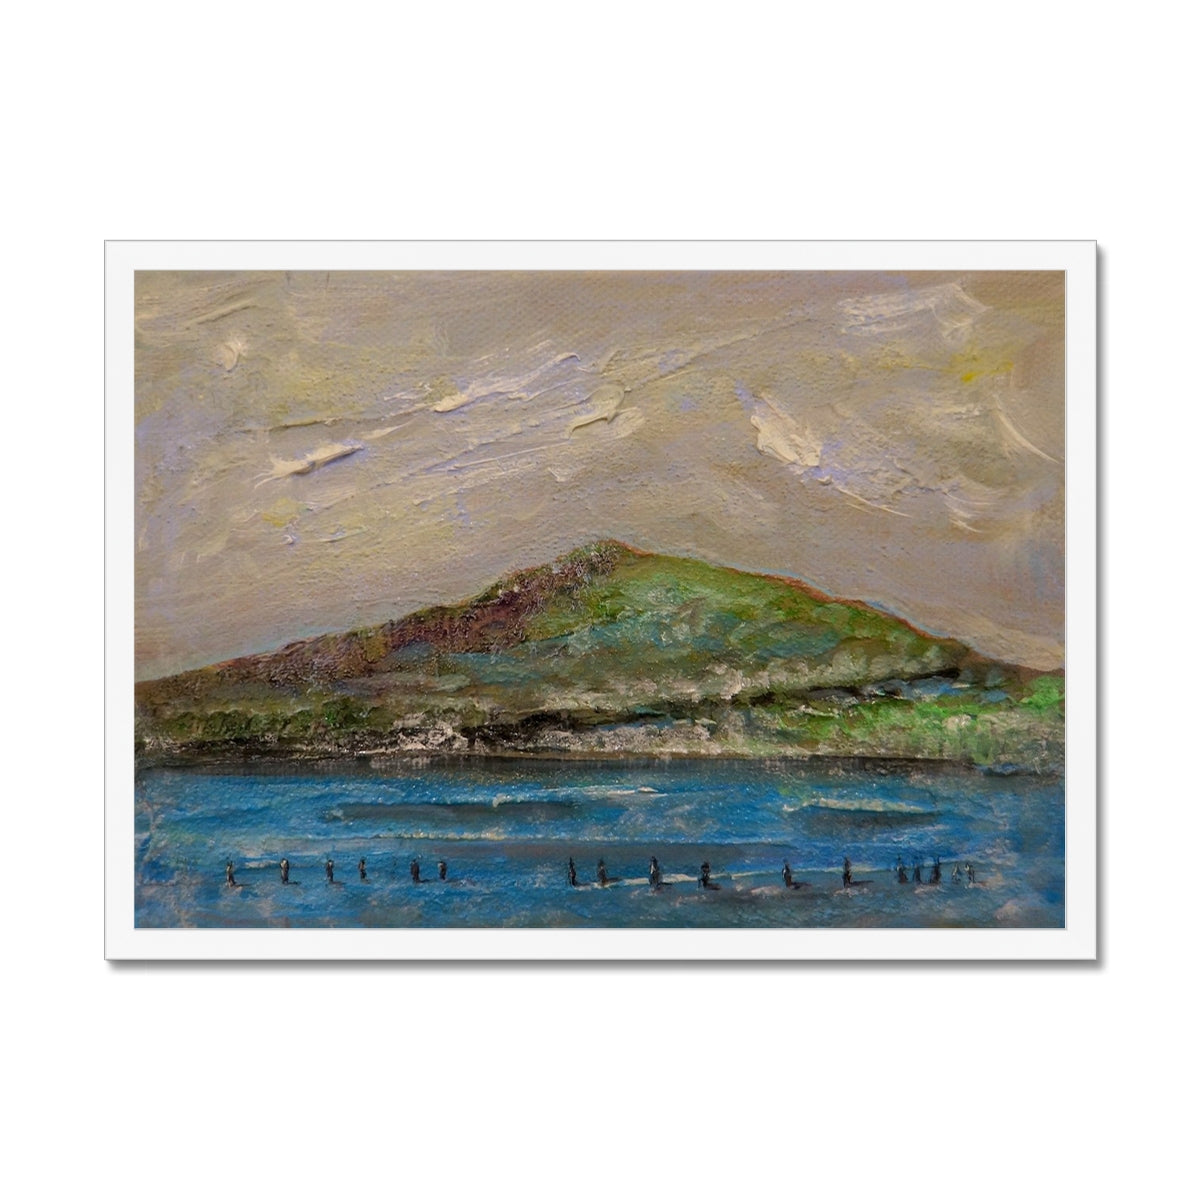 Ben Lomond iii Painting | Framed Prints From Scotland-Framed Prints-Scottish Lochs & Mountains Art Gallery-A2 Landscape-White Frame-Paintings, Prints, Homeware, Art Gifts From Scotland By Scottish Artist Kevin Hunter